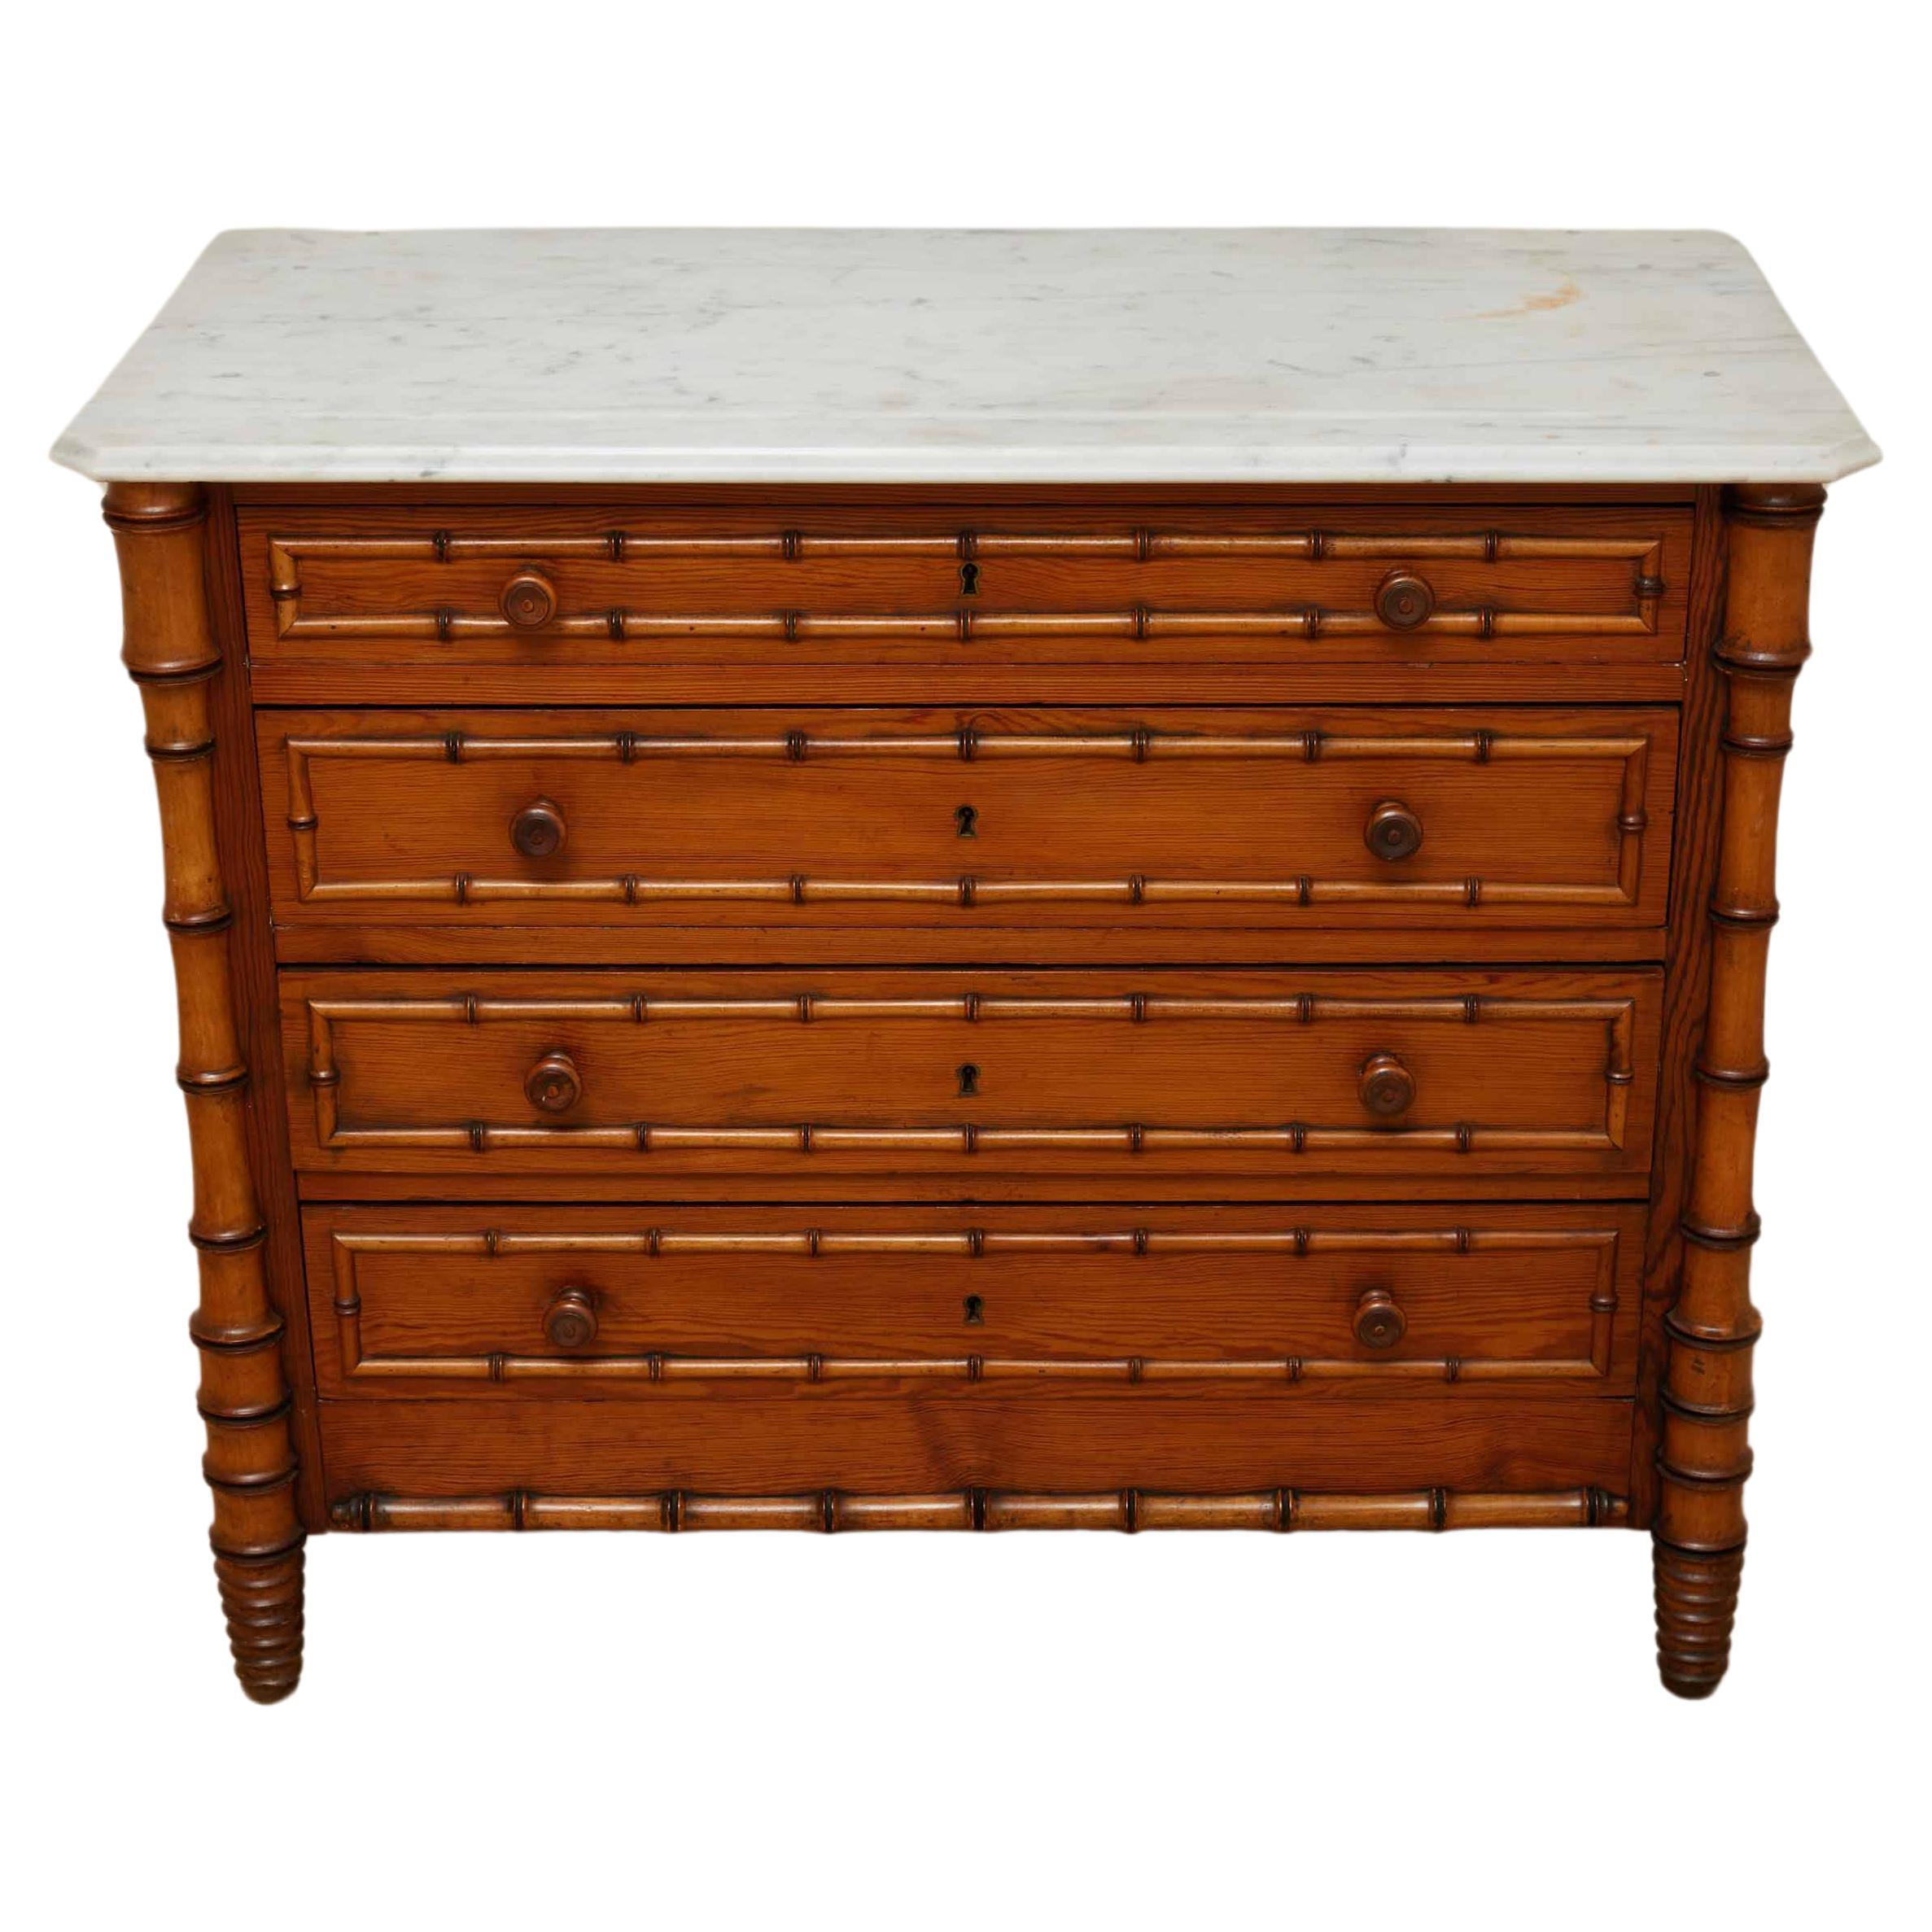 19th-C. French Faux Bamboo Pine & Marble Chest / Commode For Sale